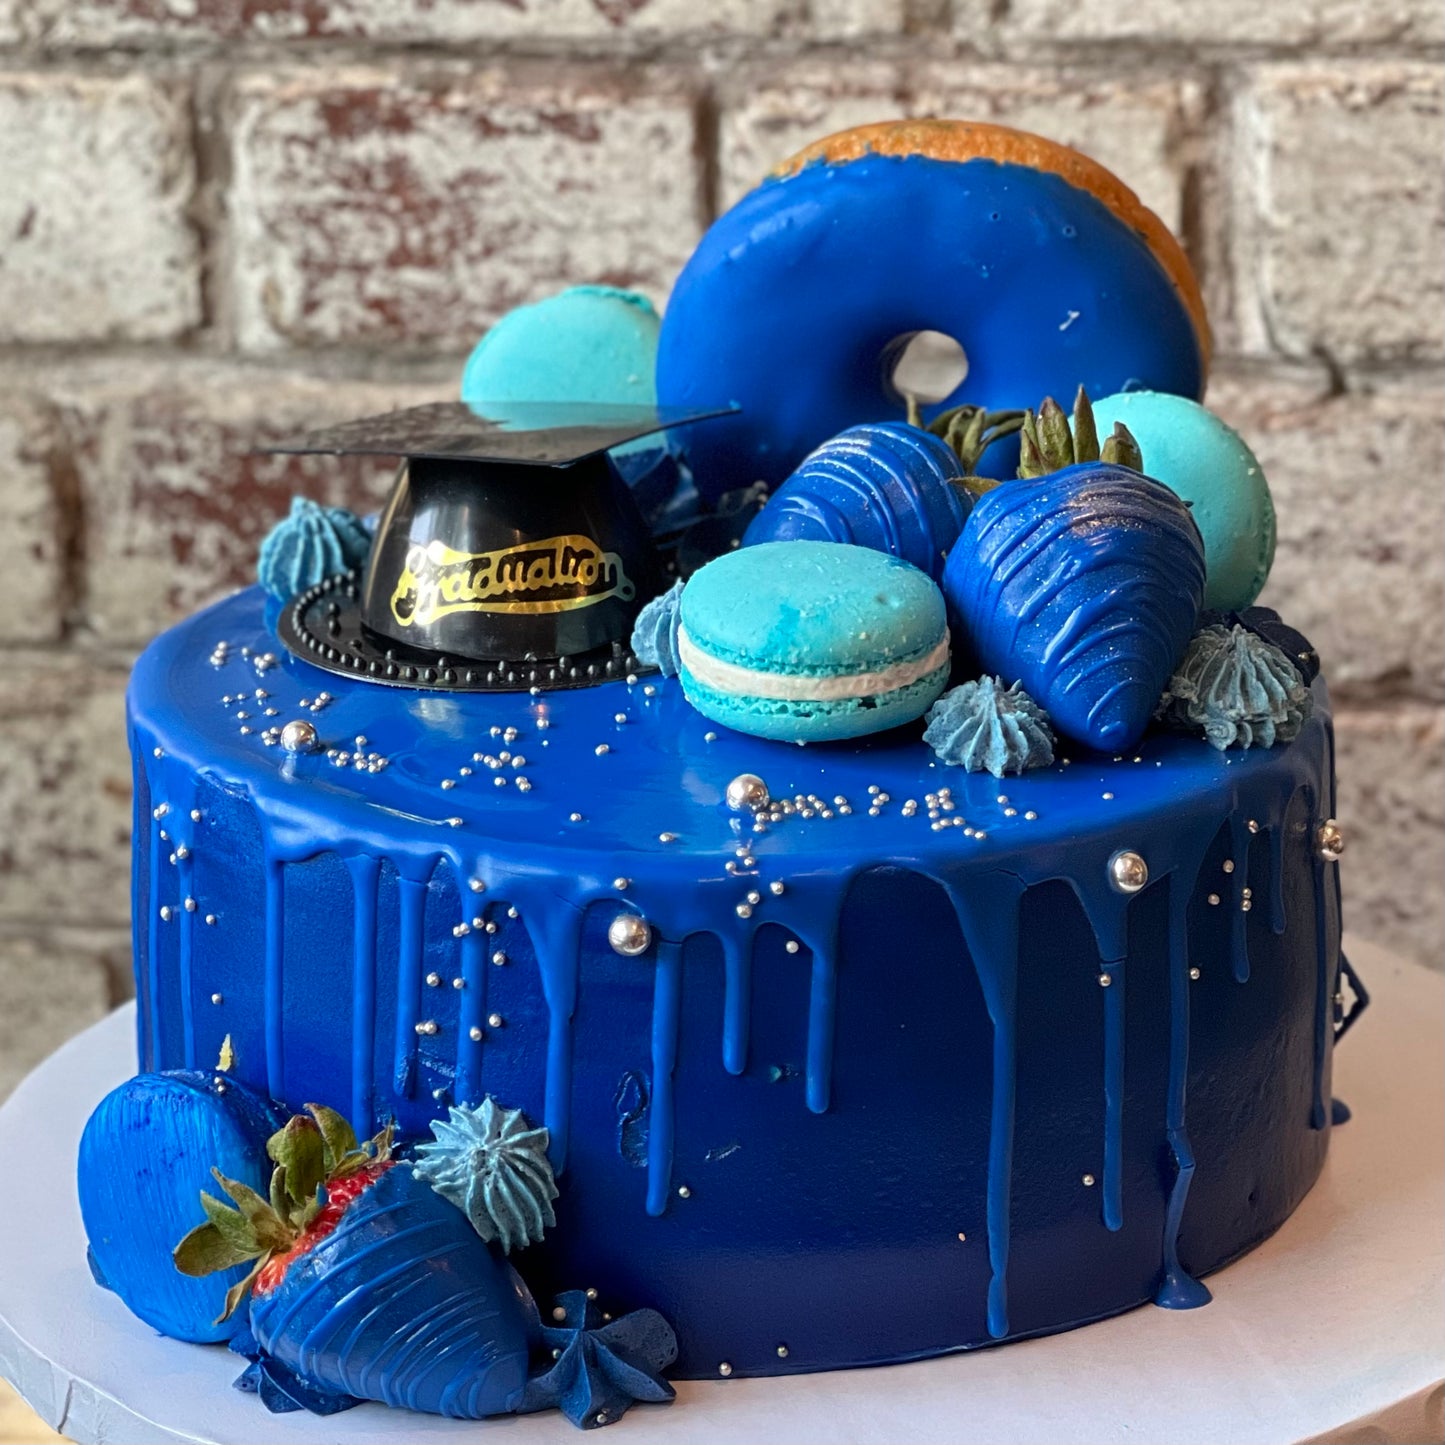 Blue graduation themed cake with donut, macarons and strawberries